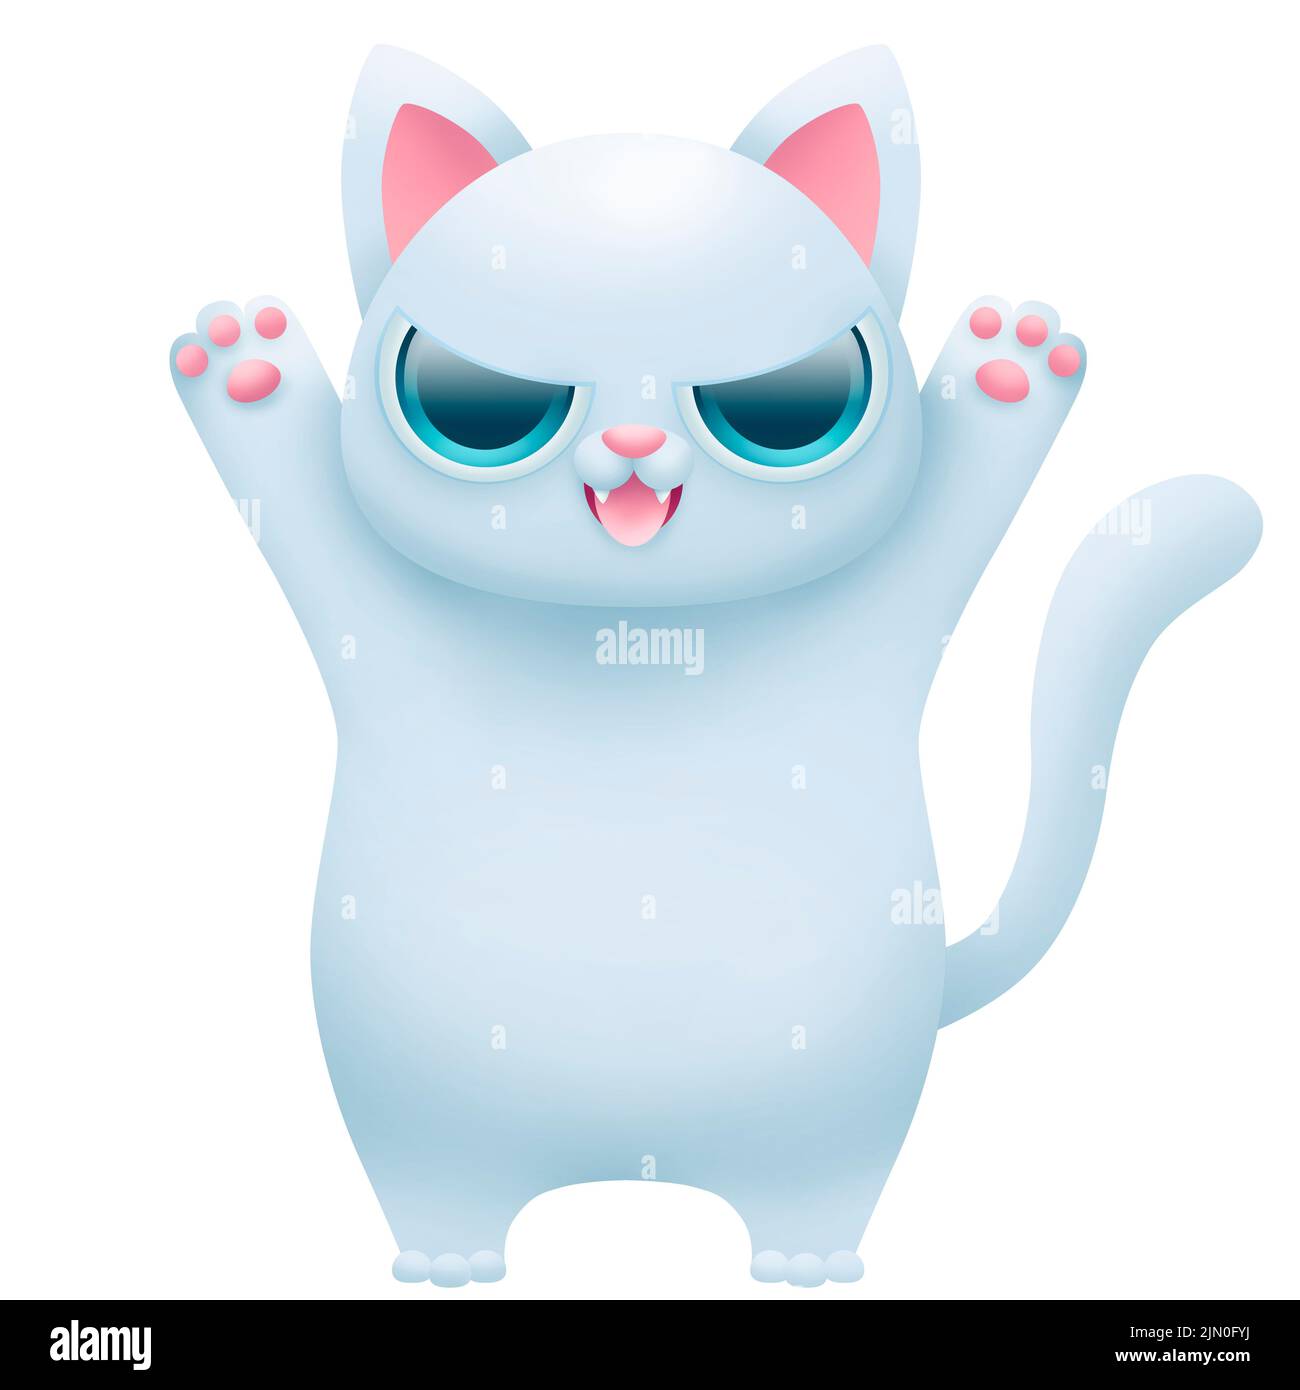 31,951 Angry Cat Vectors Images, Stock Photos, 3D objects, & Vectors